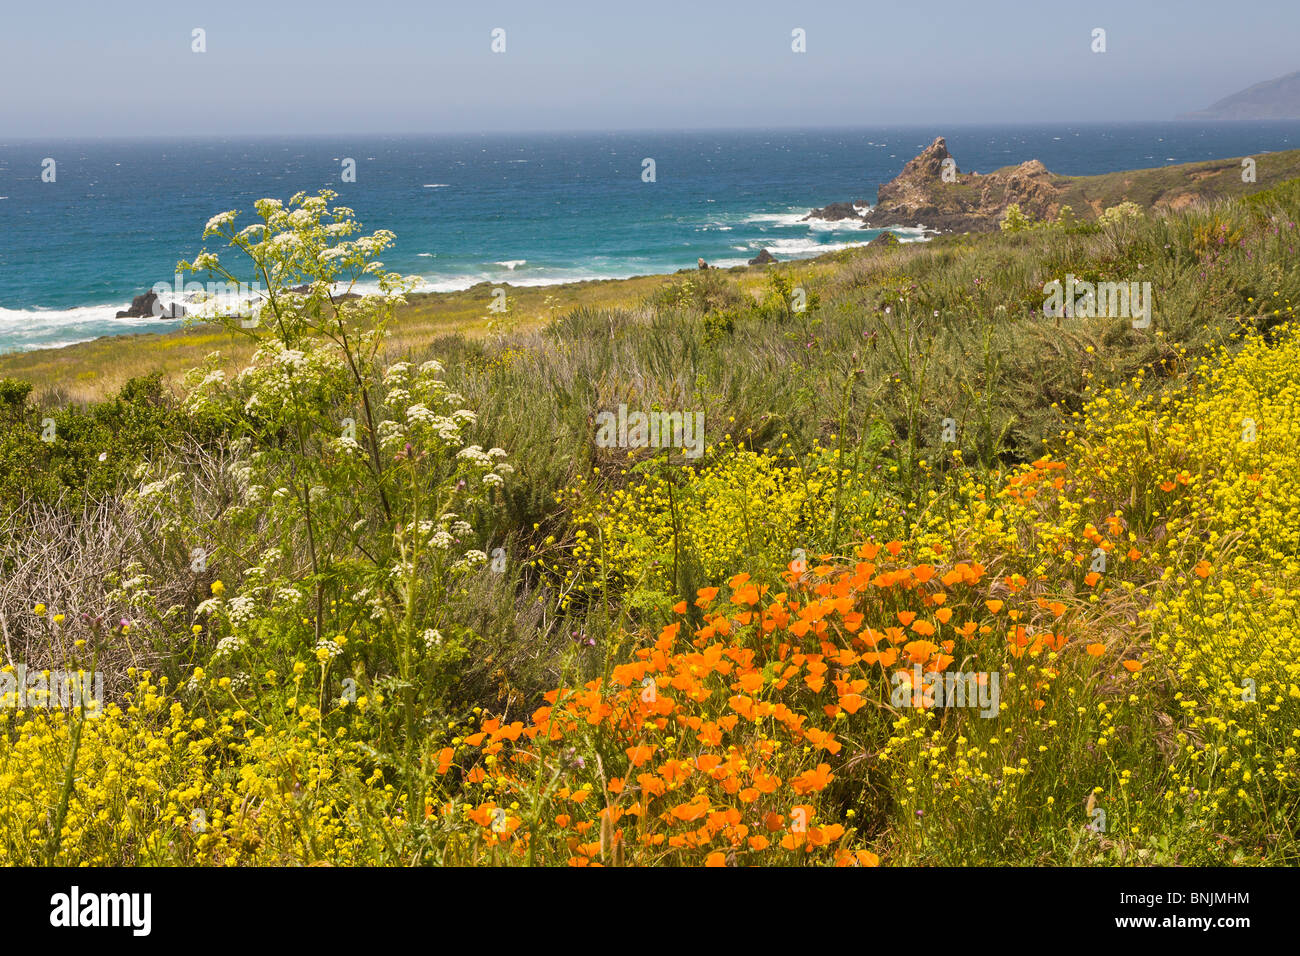 Yellow or California Poppies along Rt 1 in Big Sur on the Pacific Ocean coast of California Stock Photo